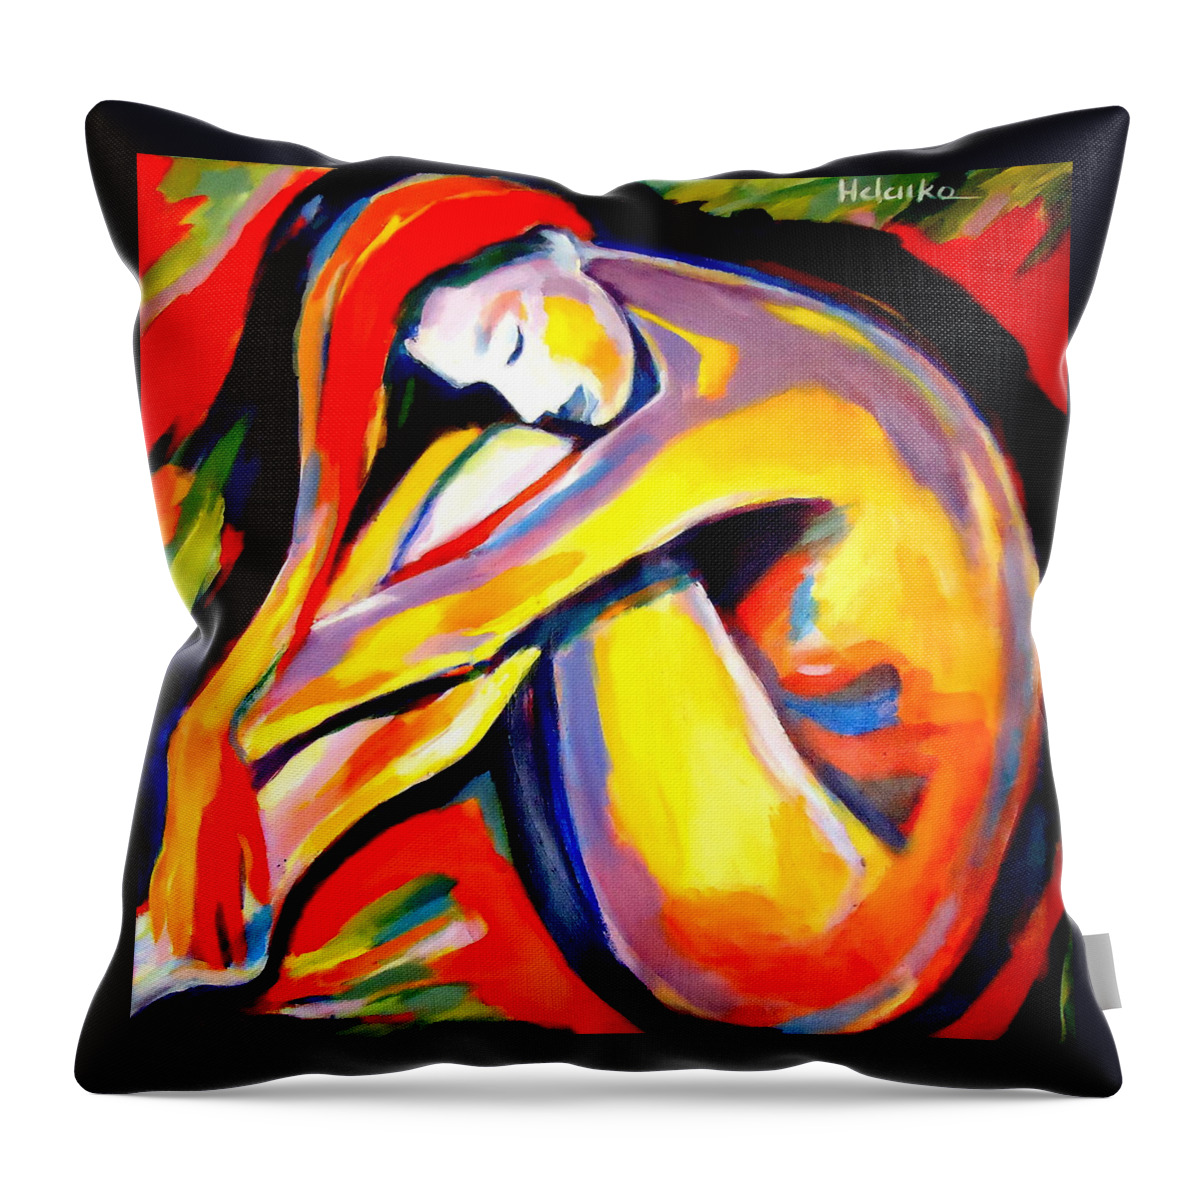 Nude Figures Throw Pillow featuring the painting Silence by Helena Wierzbicki